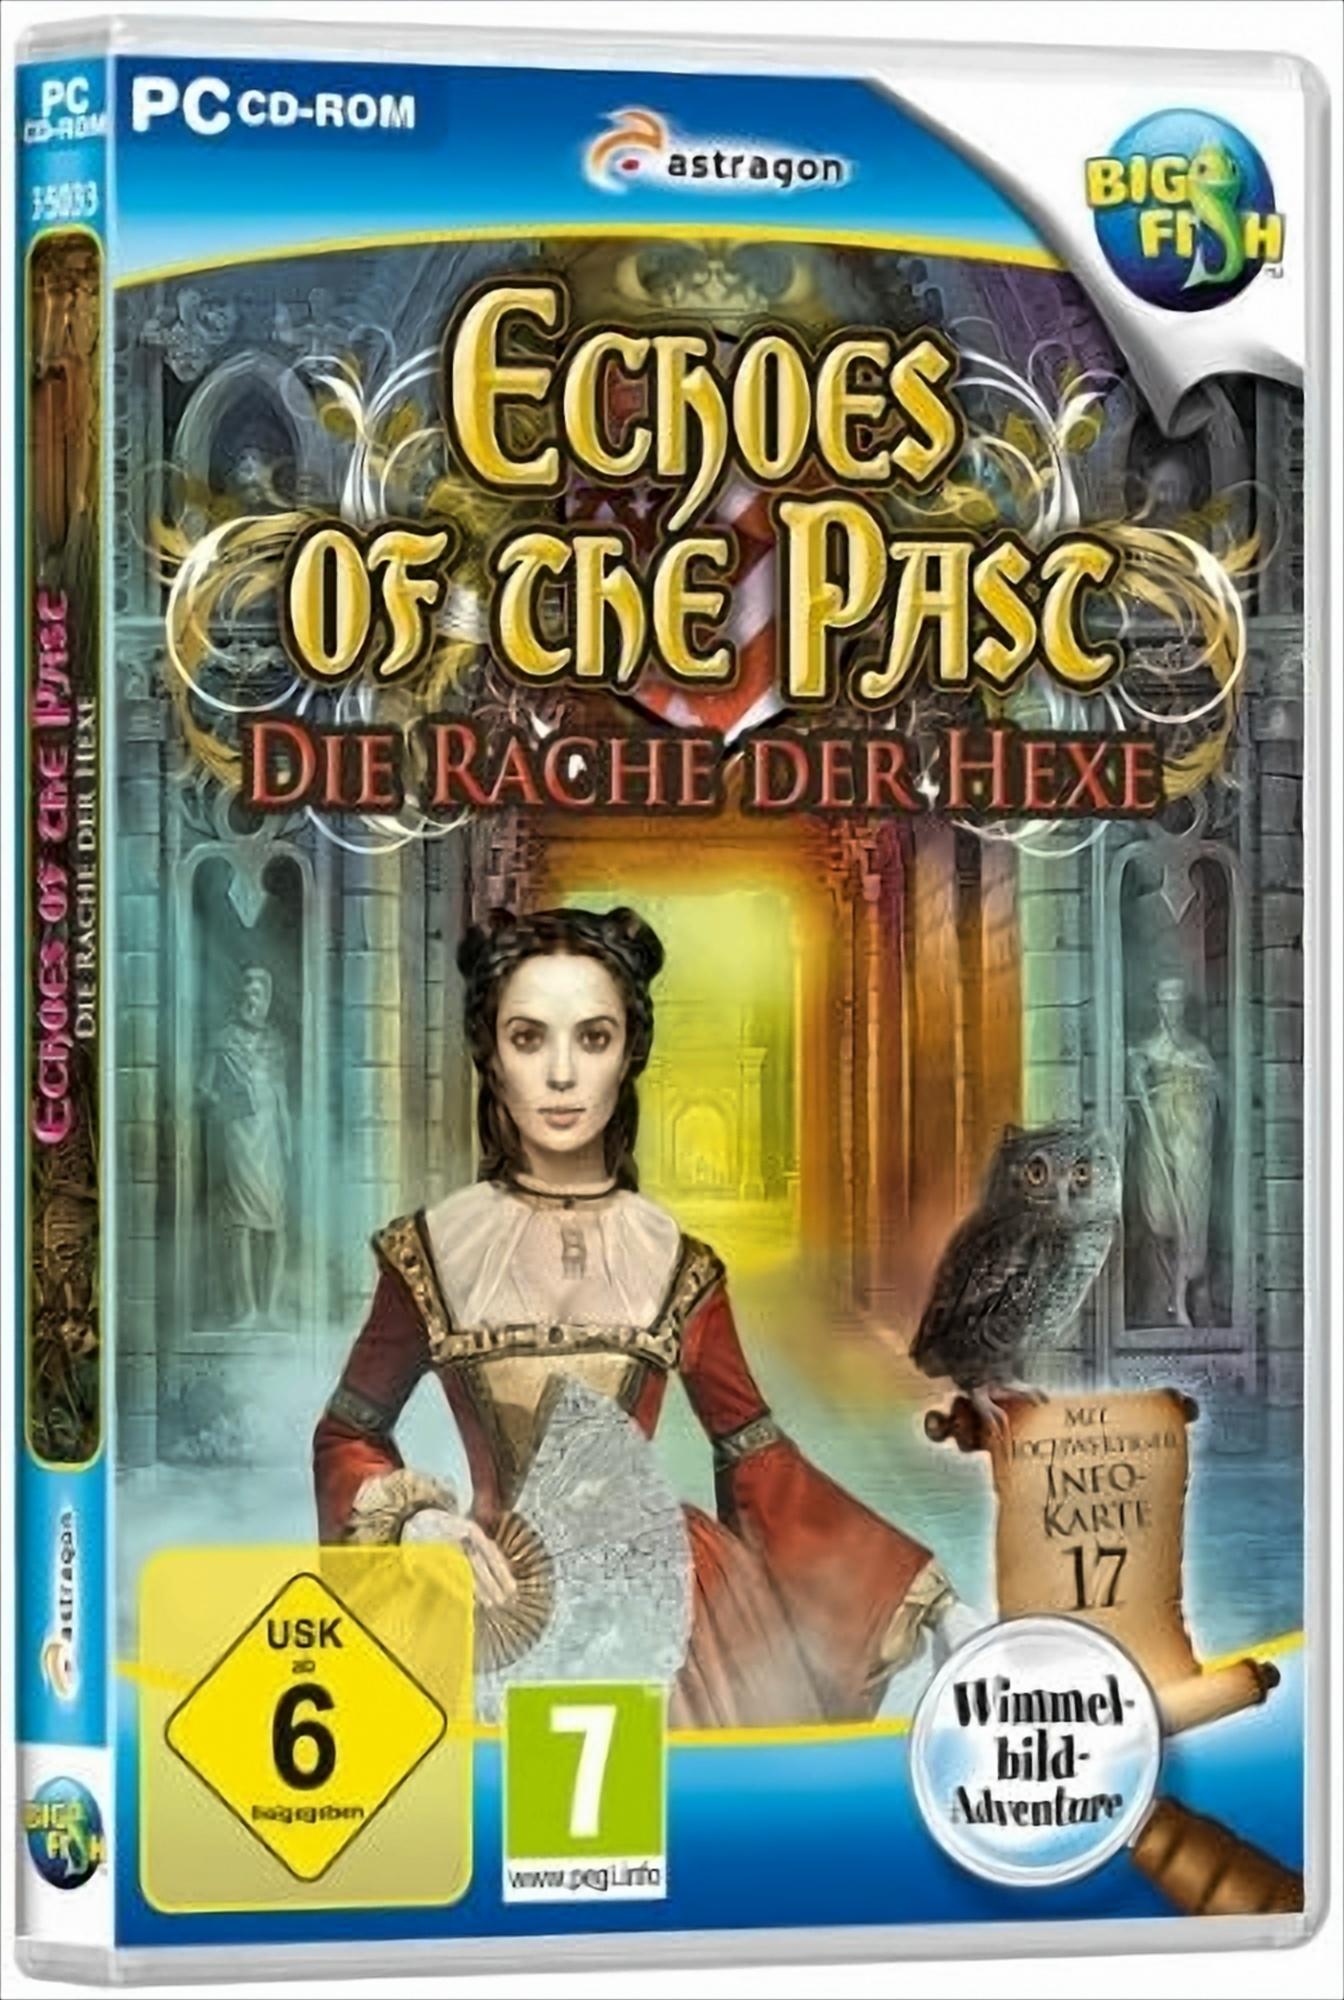 The Of Hexe Past: Die Echoes [PC] der - Rache